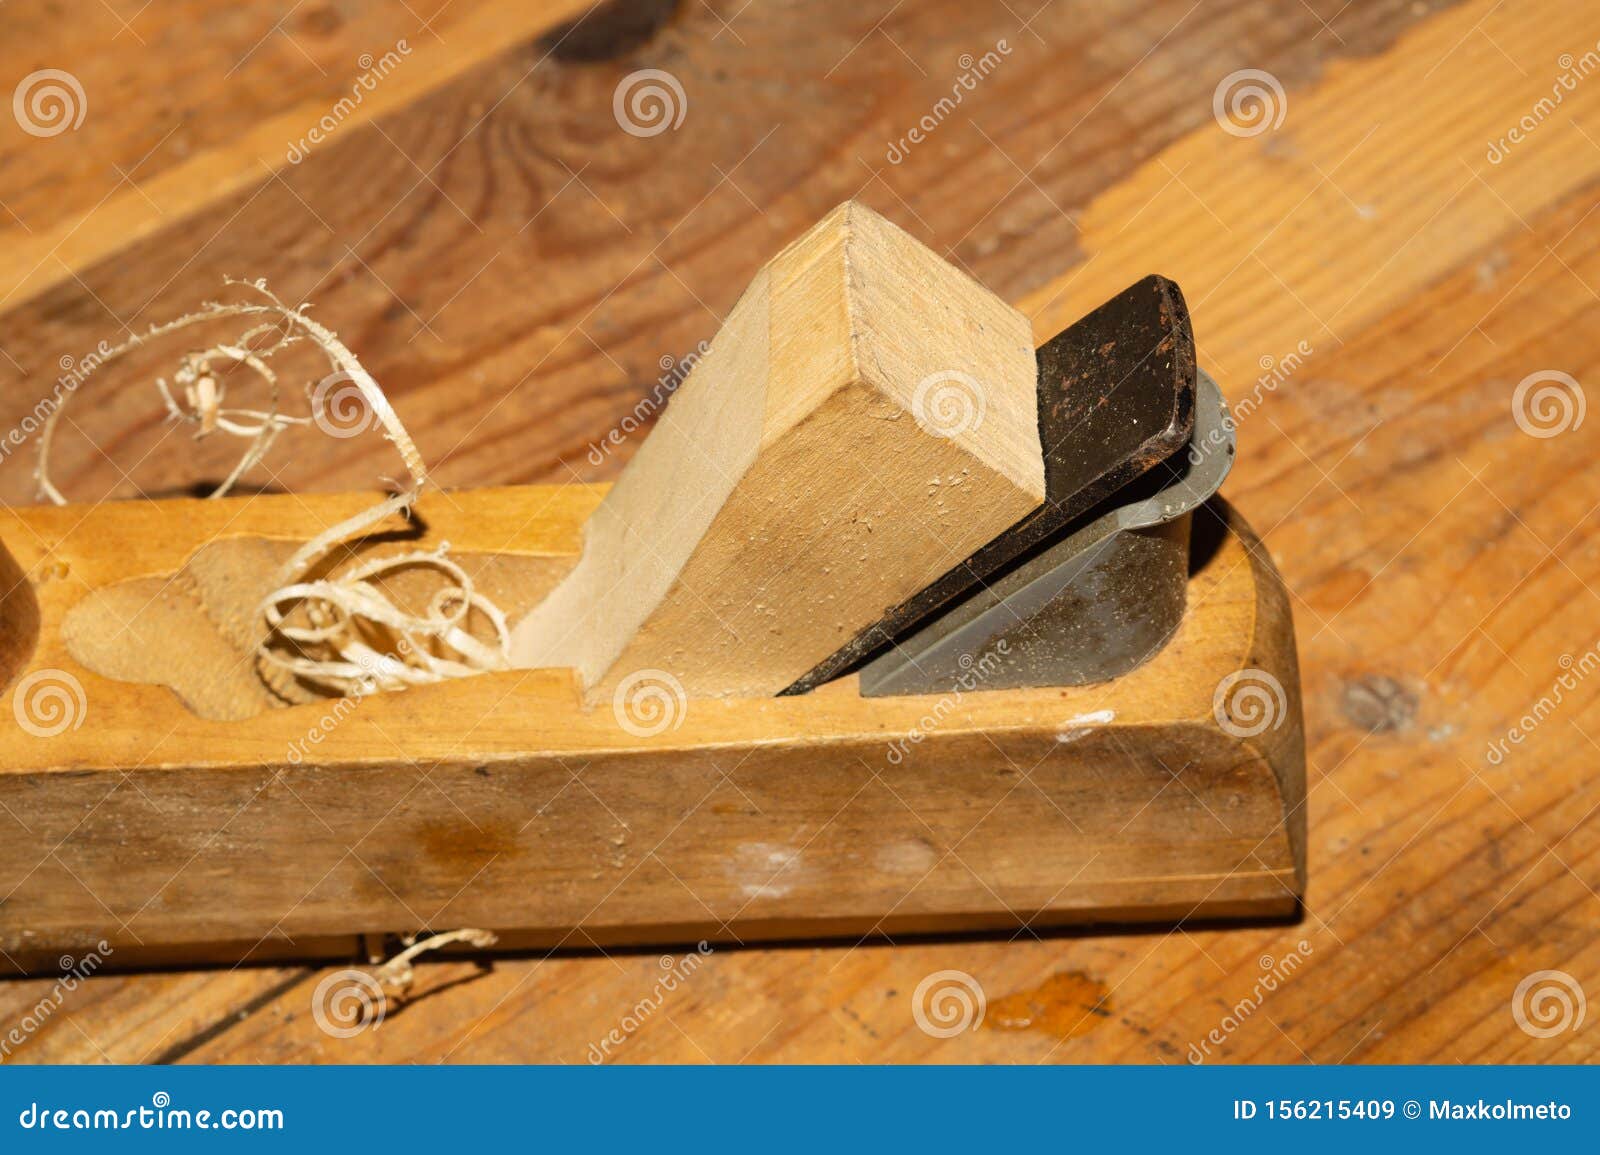 Carpentry Plane Jointer Close Up Woodworking And Crafting Tools Hand Tools Working Instrument Stock Image Image Of Board Handyman 156215409